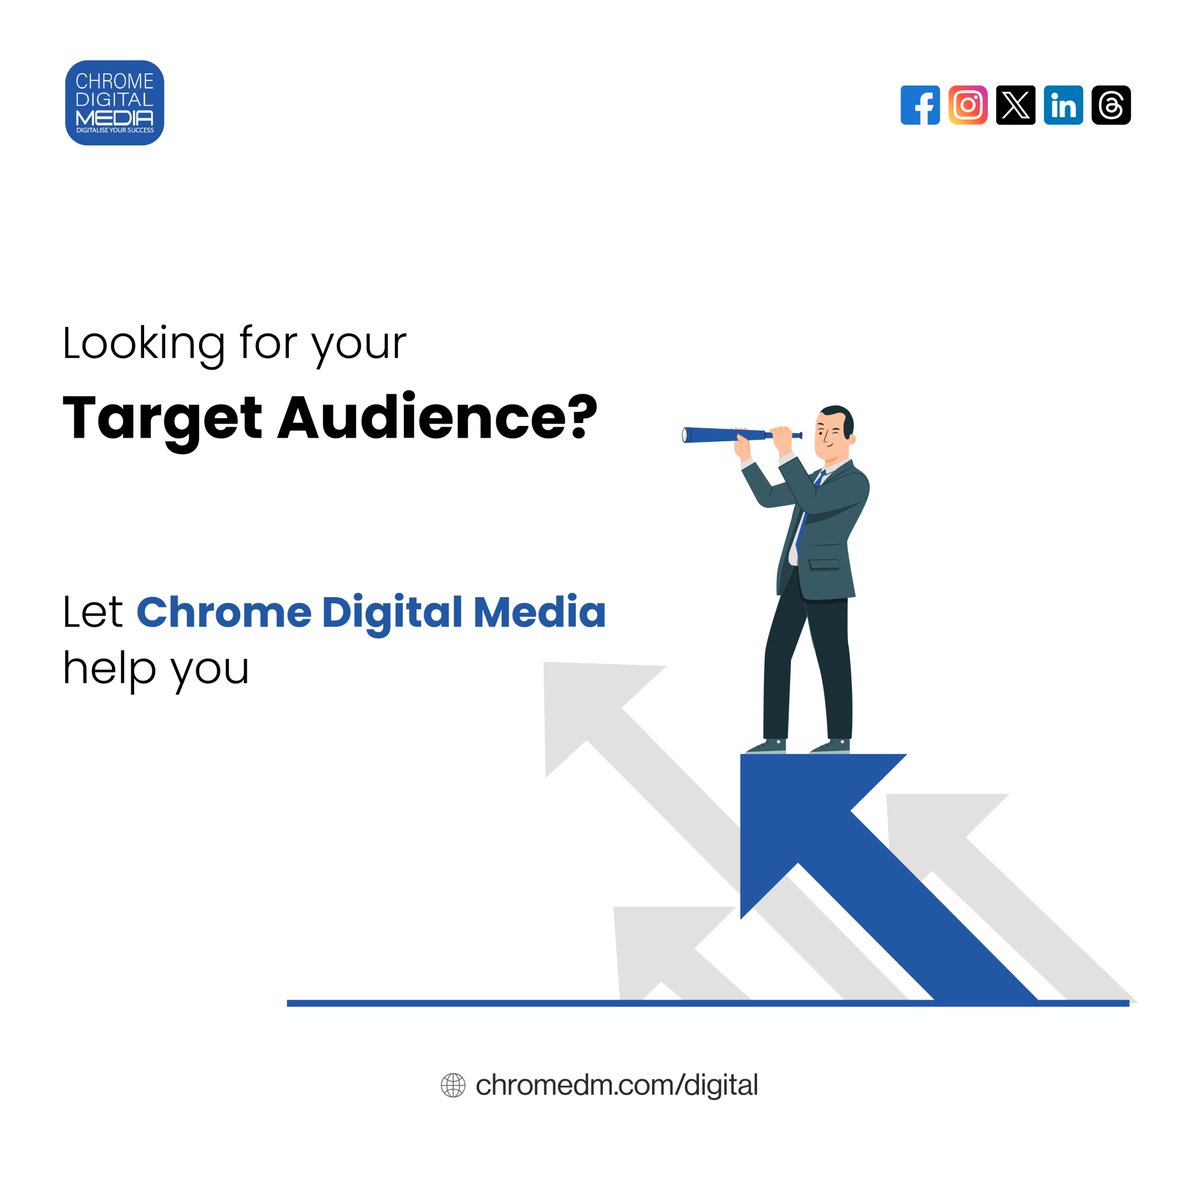 In #DigitalMarketing , don't shout to a stadium. Whisper to the right seats. Target the audience who cares, not just anyone online.

🌐 Visit our website - chromedm.com/digital or
📧 Mail us at - digital@chromedm.com to learn more about our services
_
#ChromeDigitalMedia